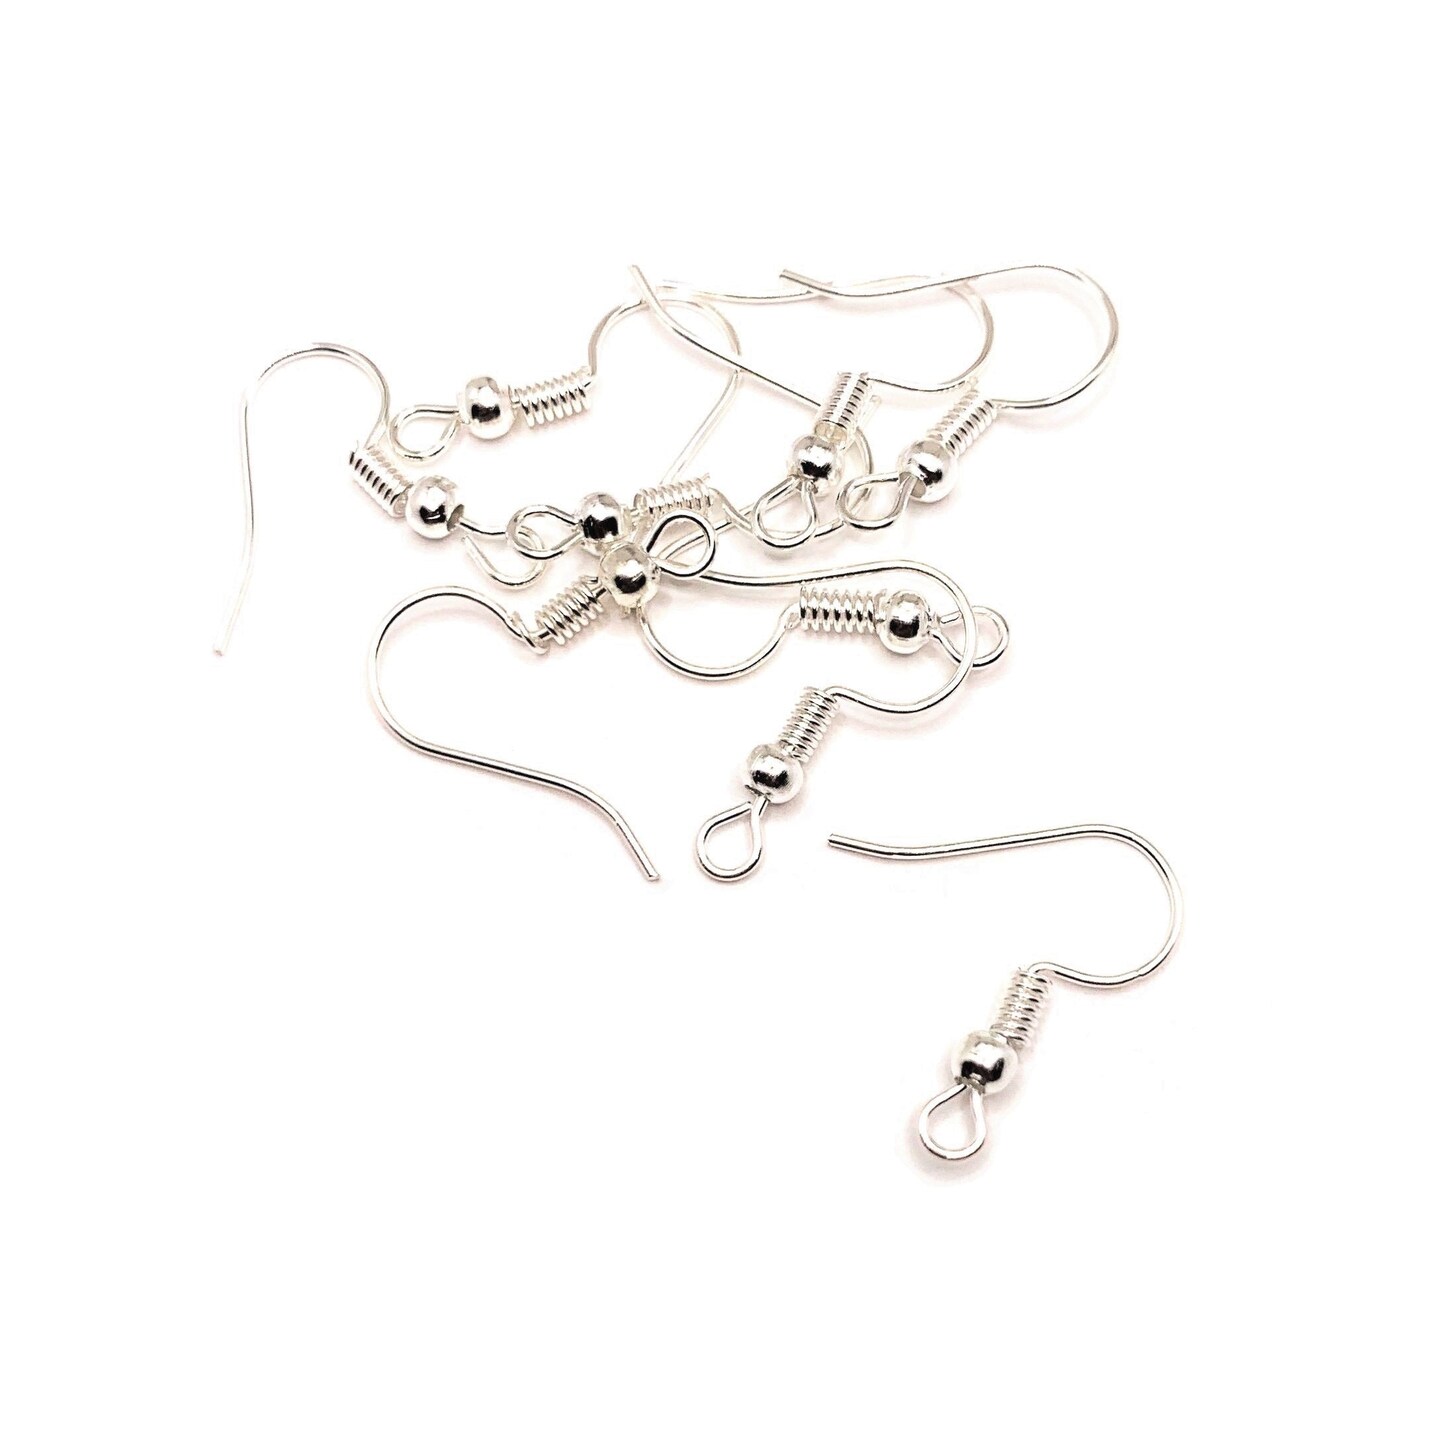 100 or 500 Pieces: Bright Silver Plated Fish Hook Earring Wires with Spring  and Ball